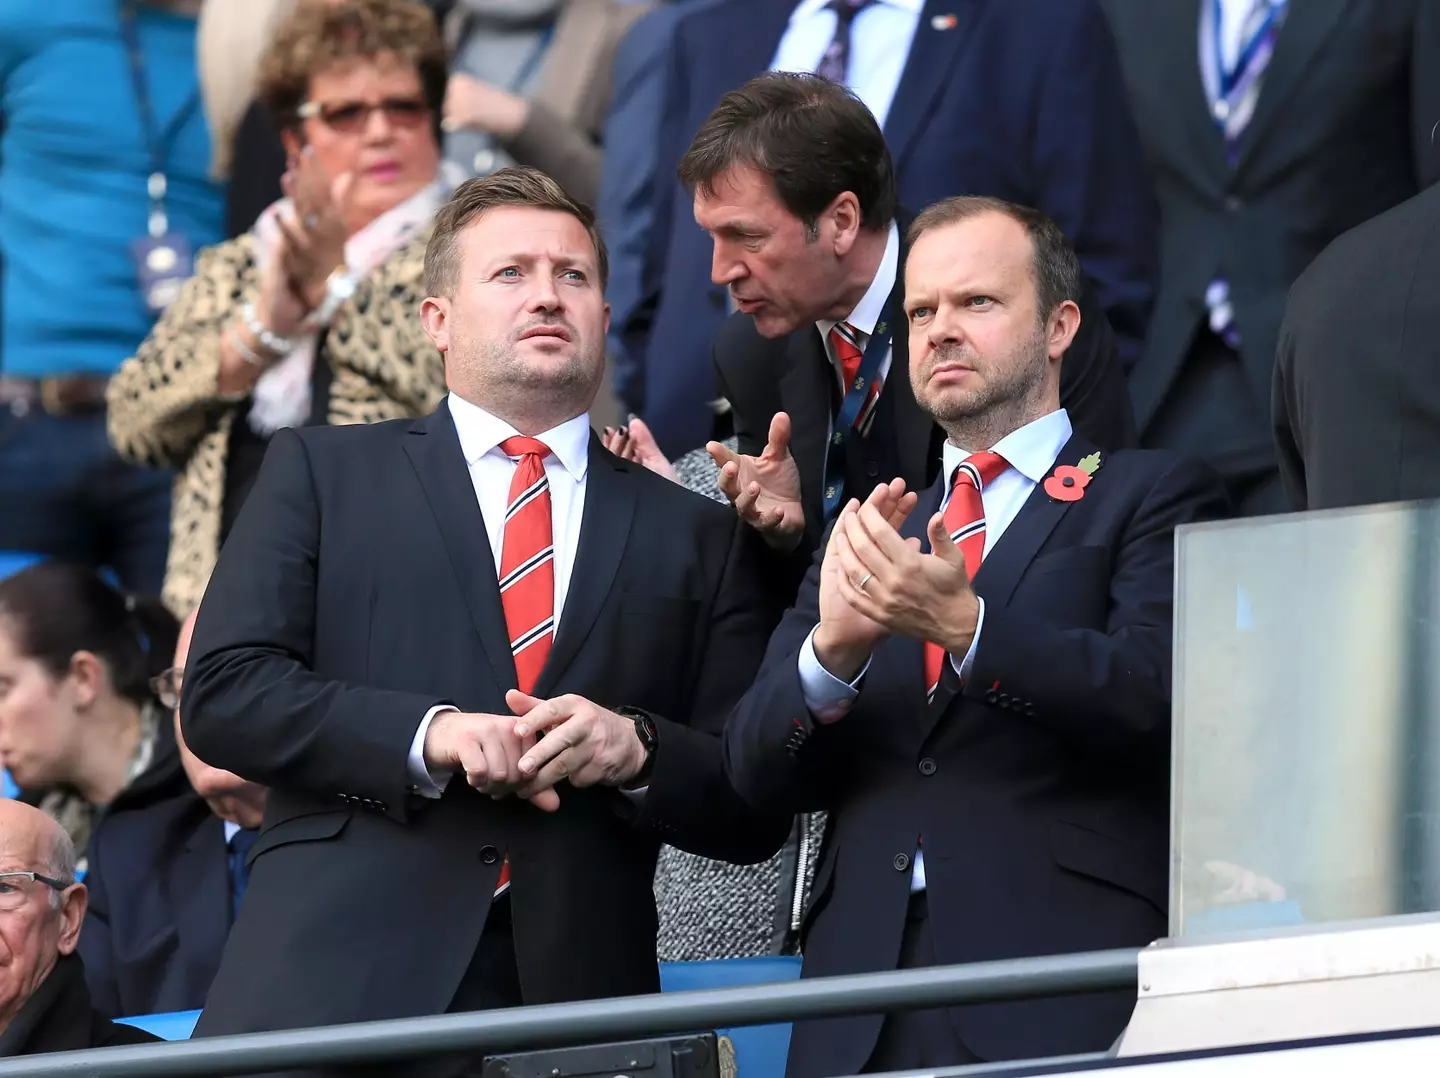 Richard Arnold recently took over Ed Woodward's role at Manchester United. (Alamy)